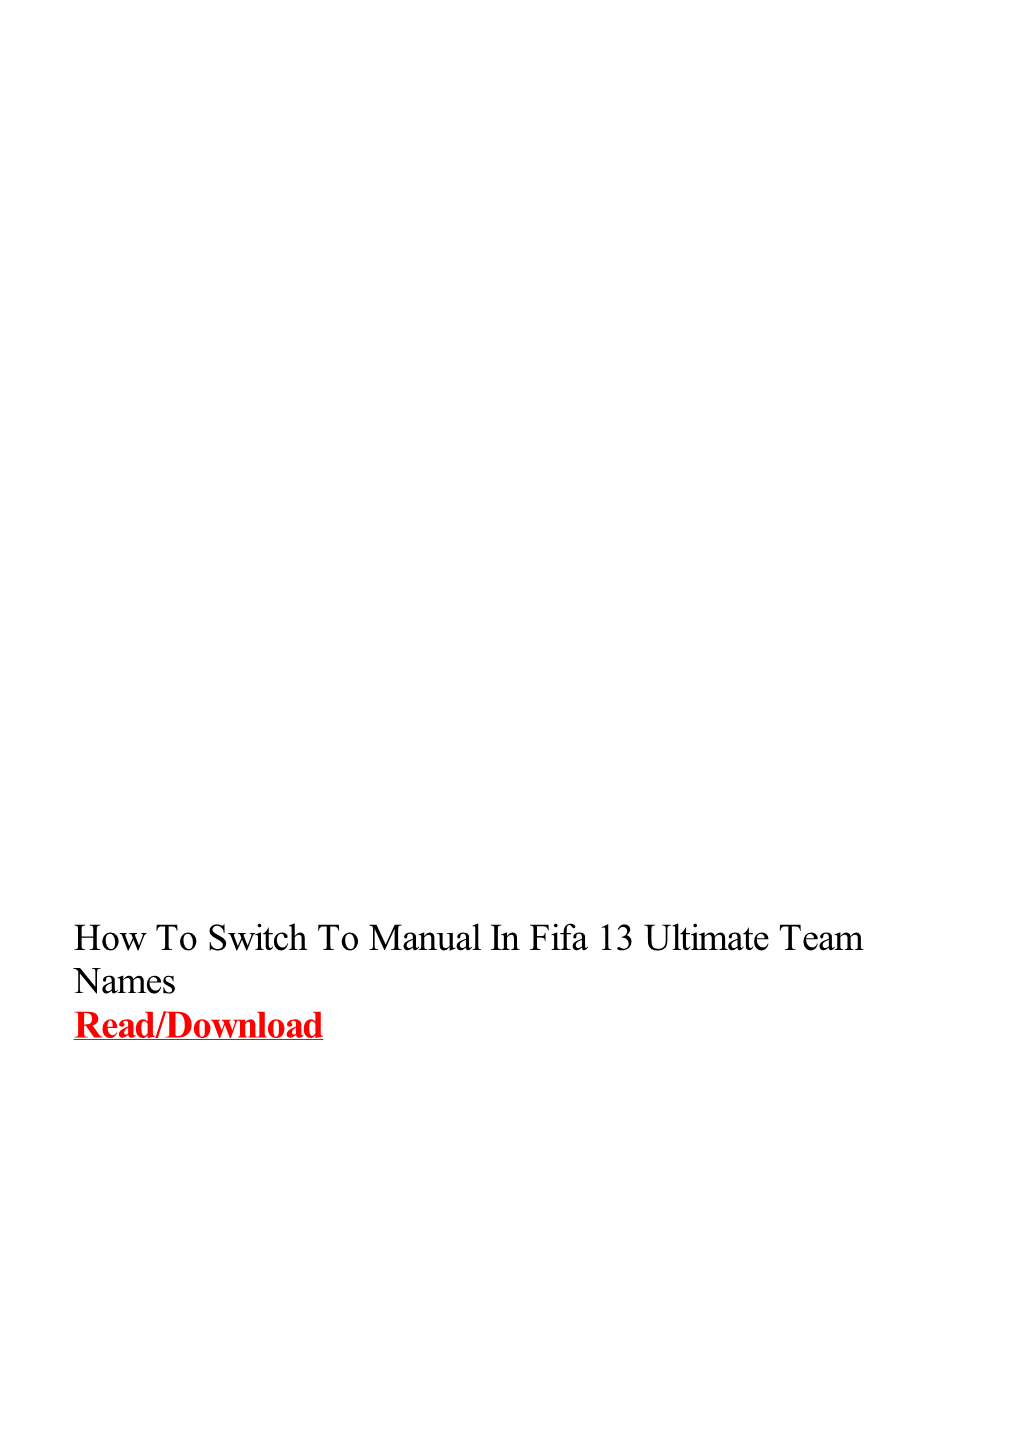 How to Switch to Manual in Fifa 13 Ultimate Team Names